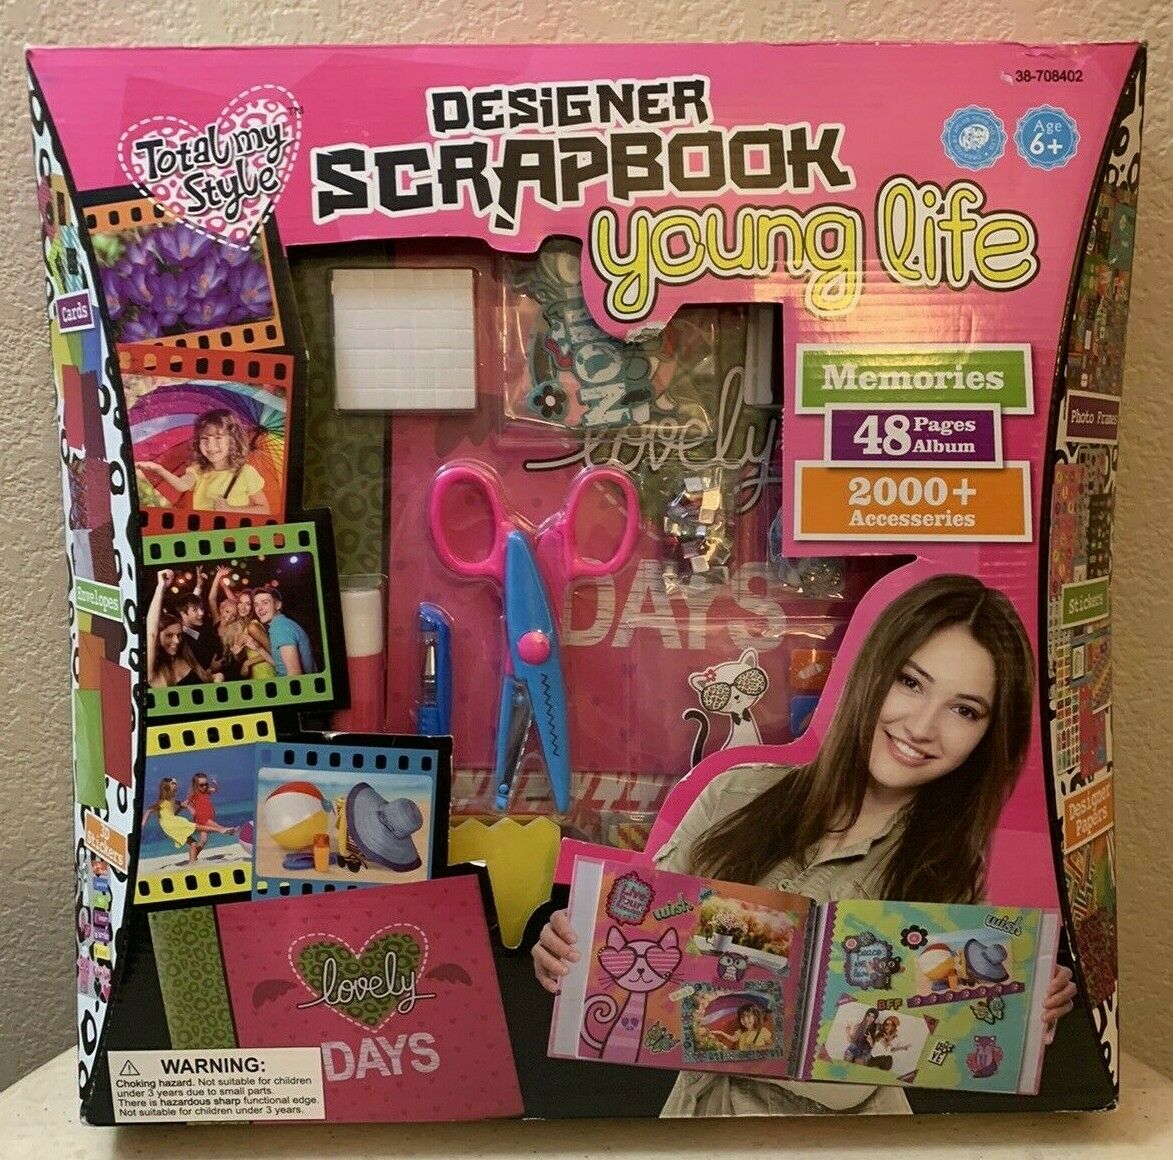 New Total My Style Designer Scrapbook Young Life 48 Pages Album 2000+ Access Nib